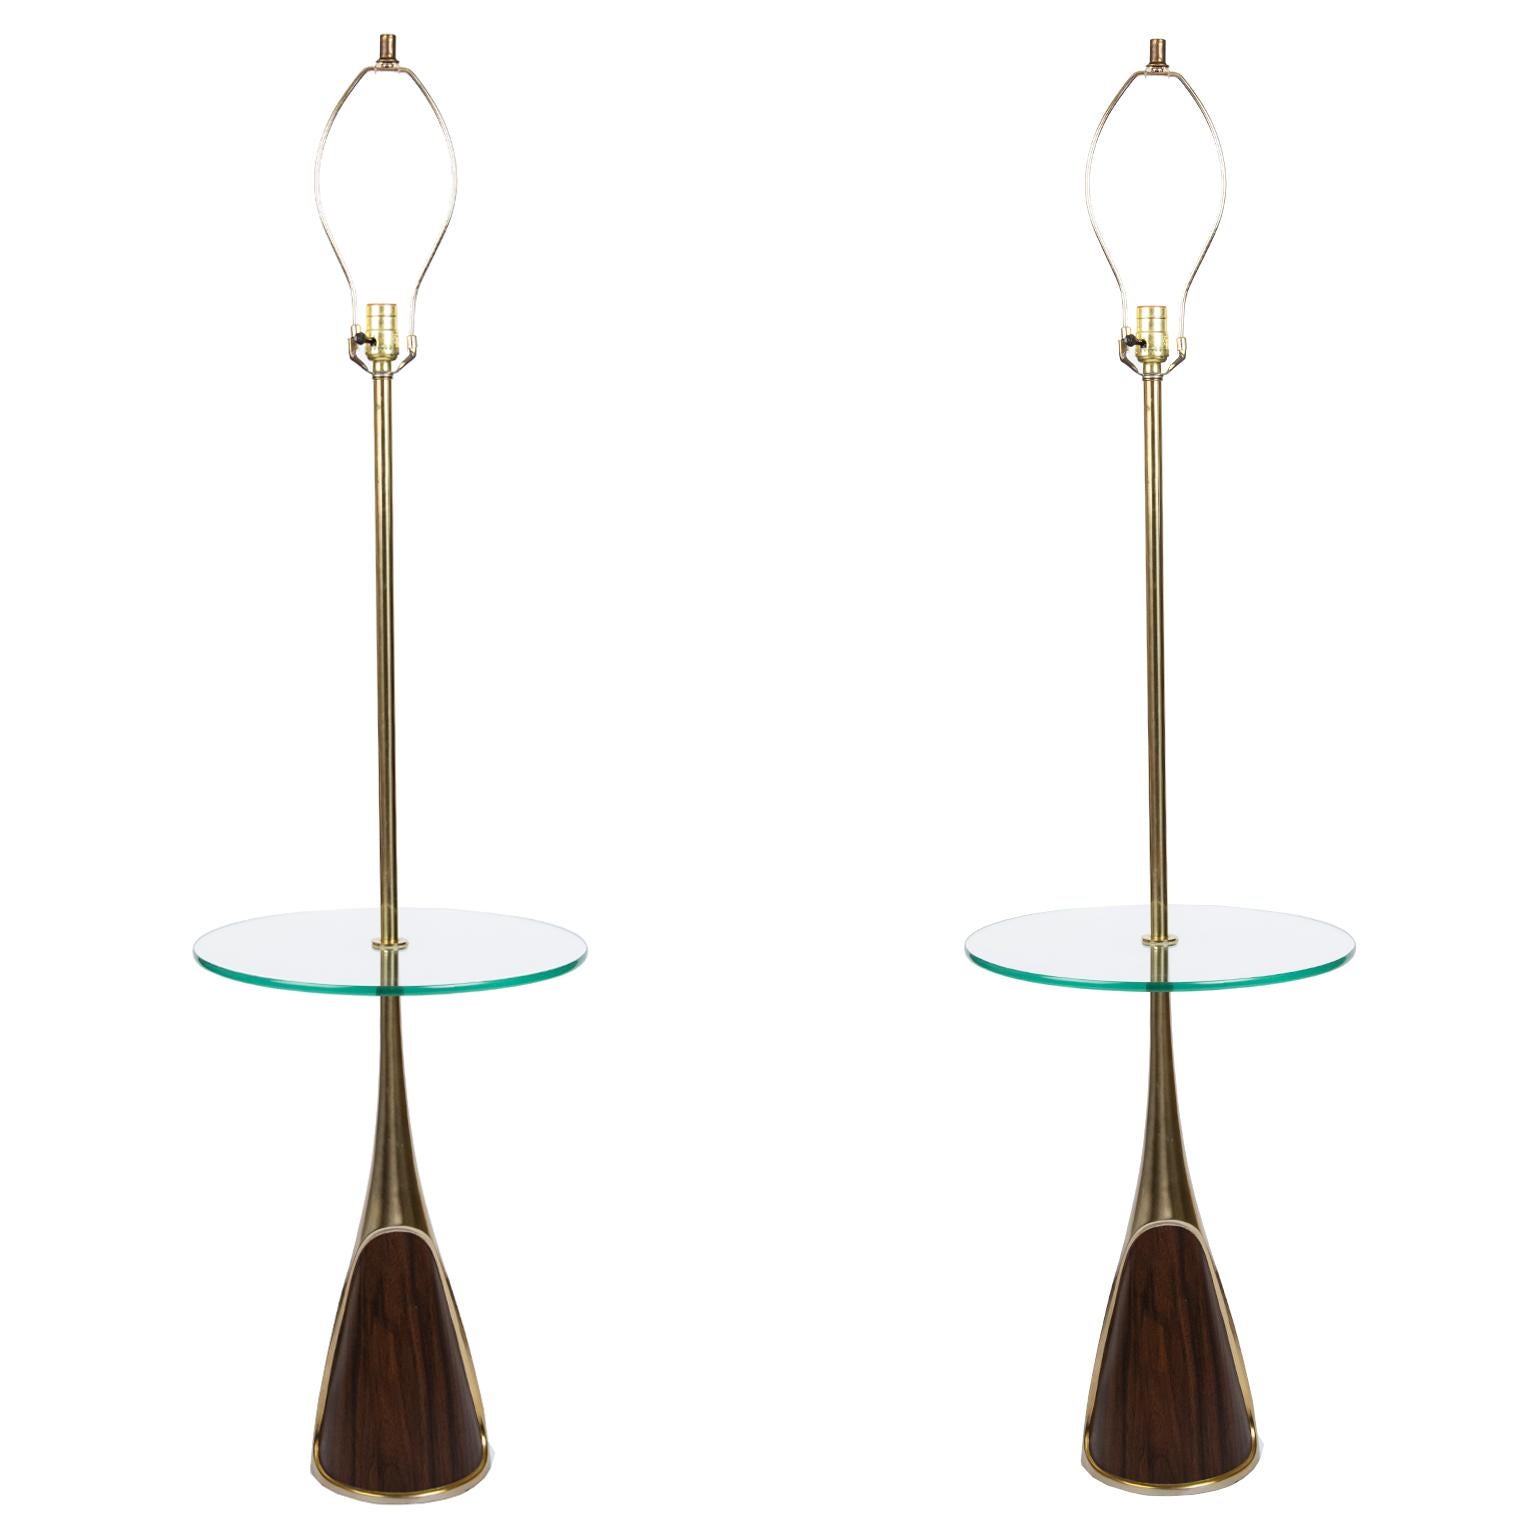 Mid-20th Century Pair of Mid-Century Modern Floor Lamps by the Laurel Lamp Company, Usa